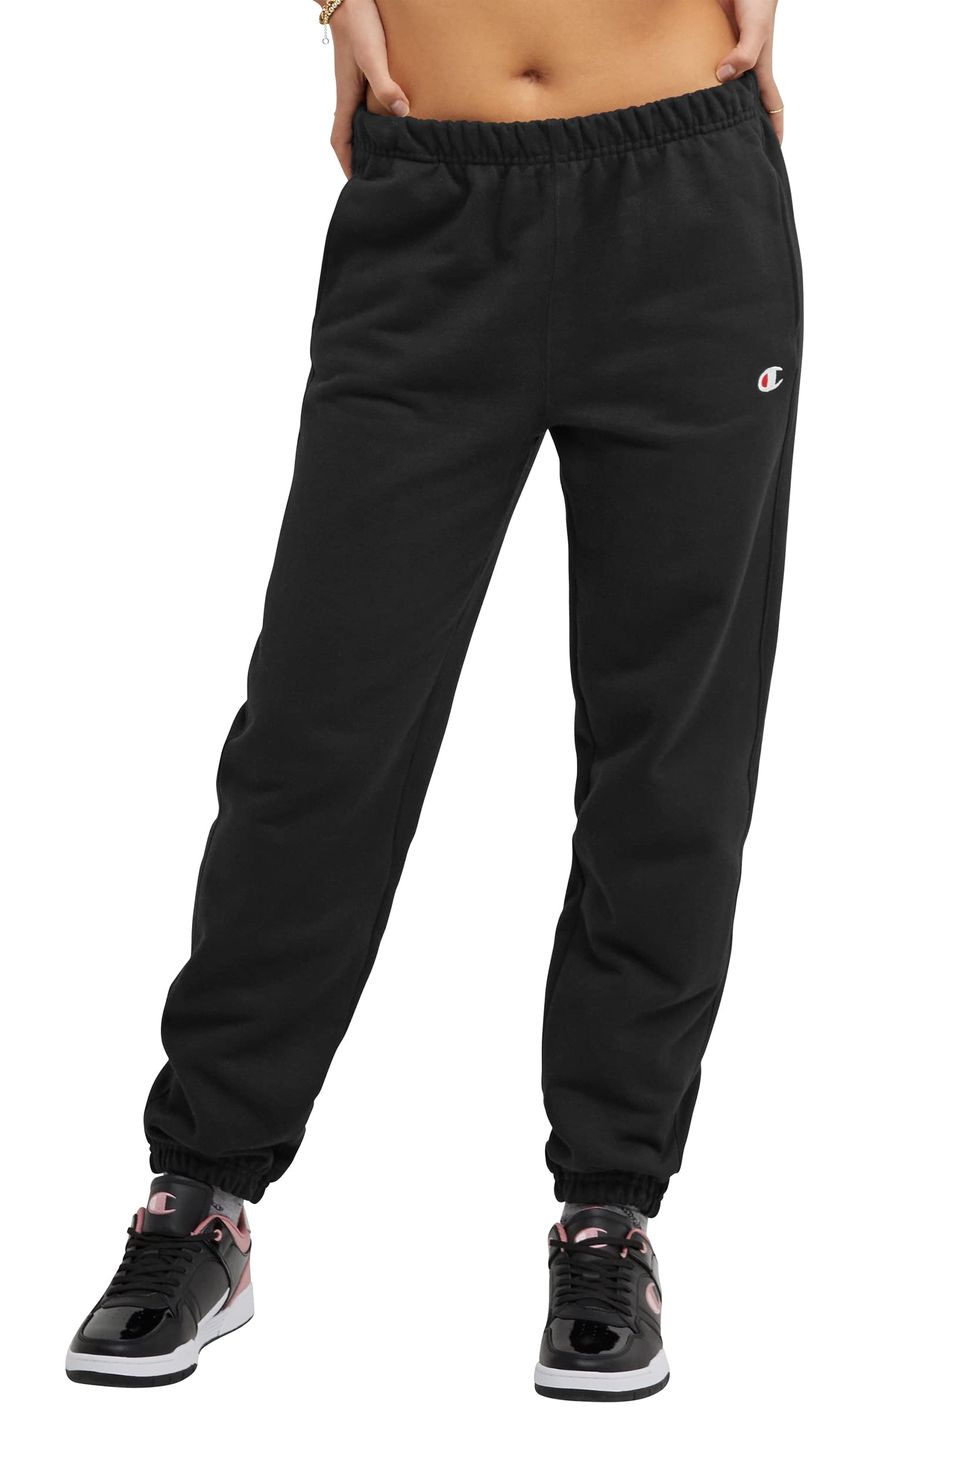  BALEAF Women's Track Sport Pants Soft Lightweight Jogger  Sweatpants with Pockets Grey L : Clothing, Shoes & Jewelry